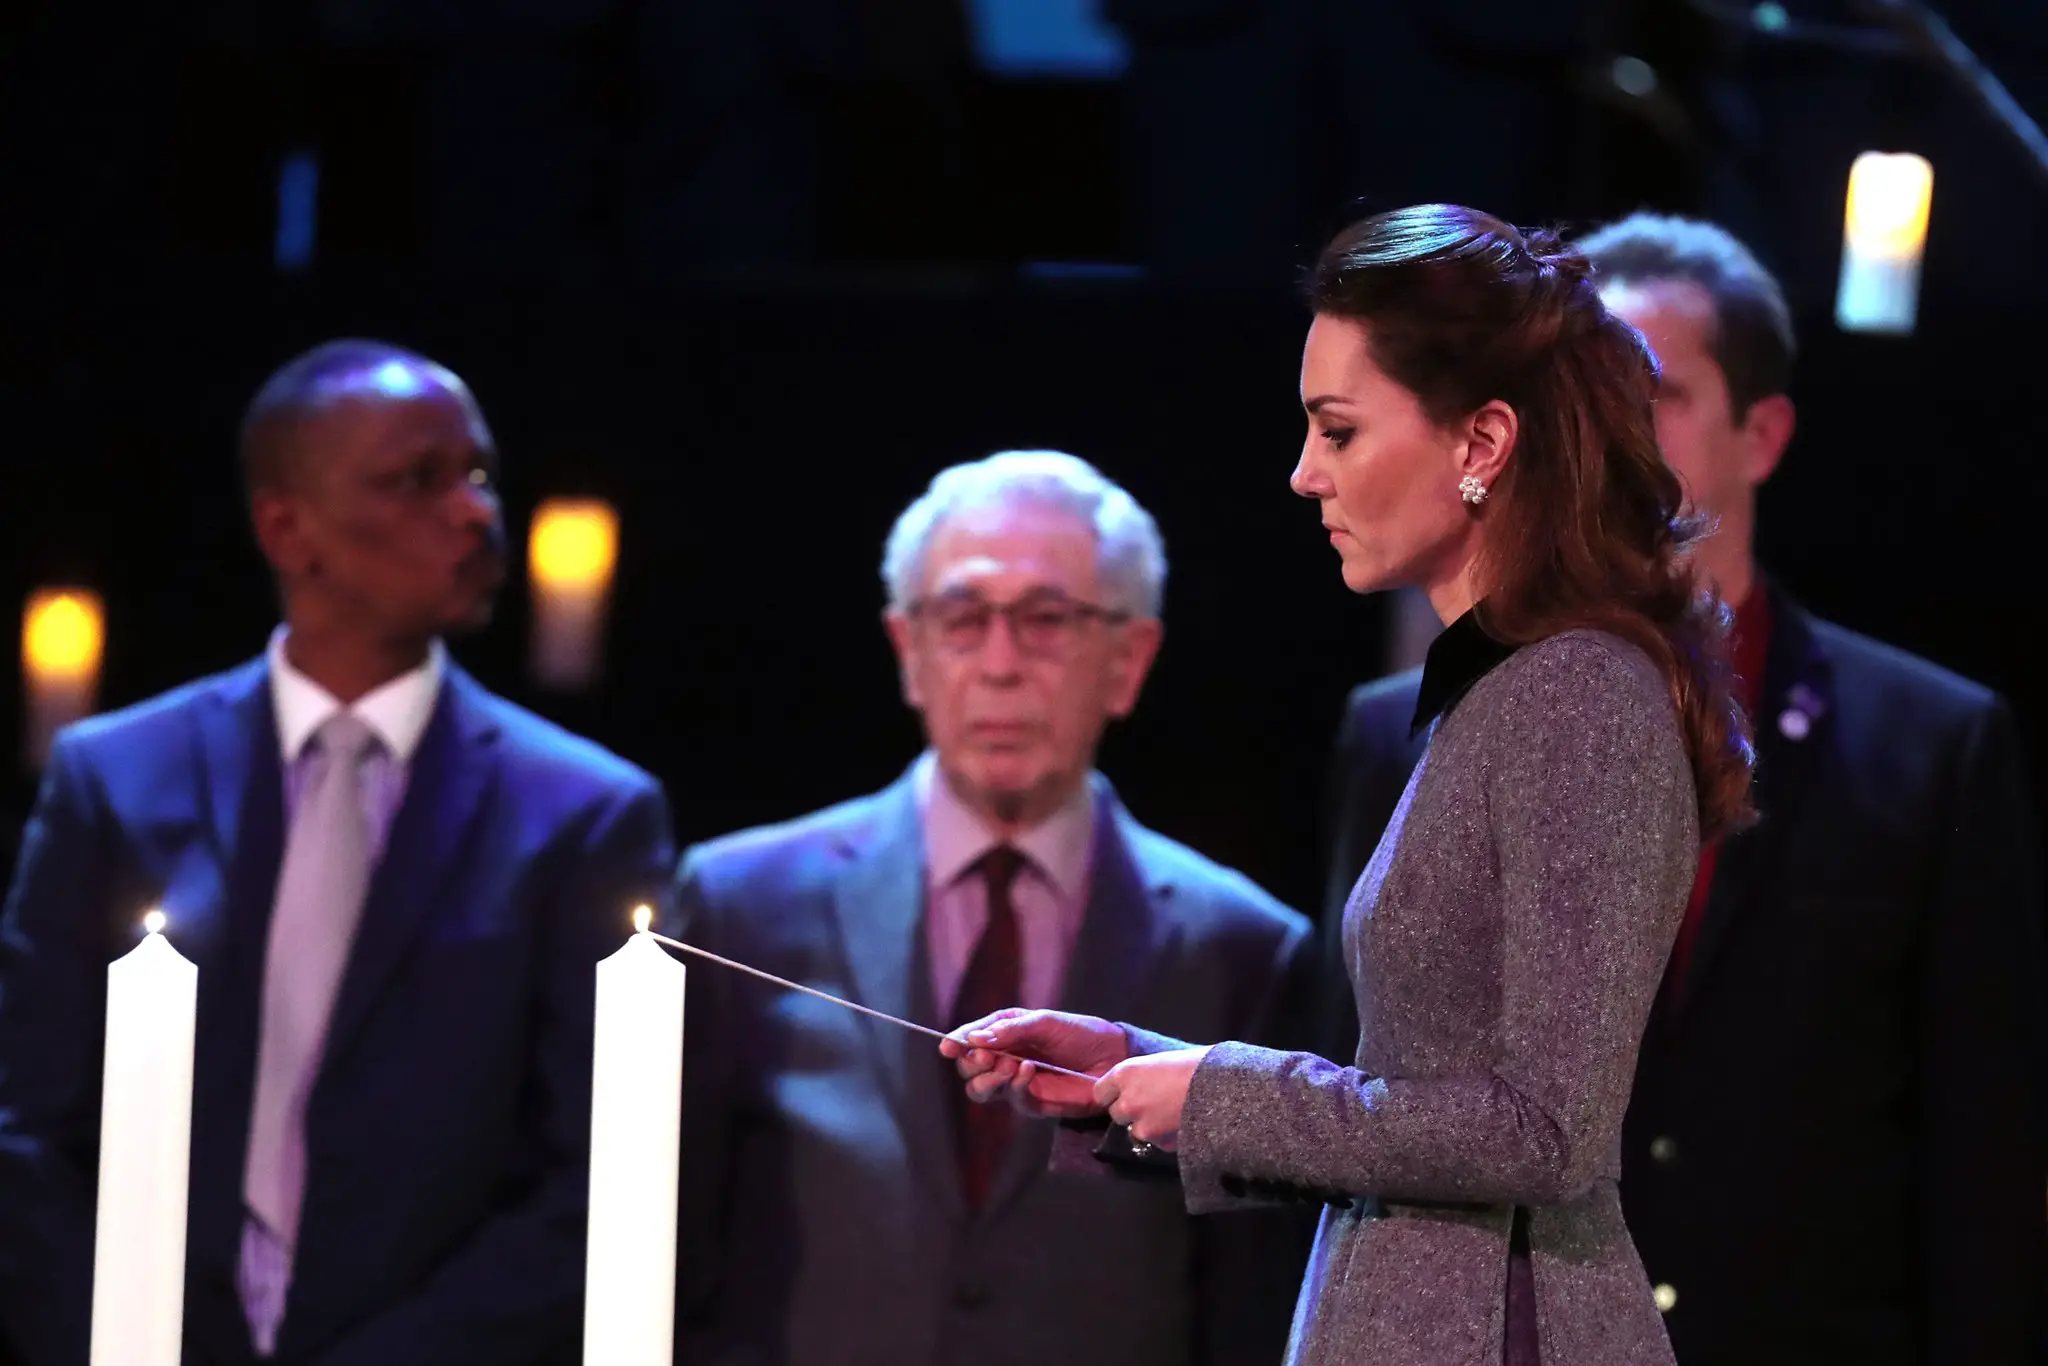 The Duchess of Cambridge lightened a candle at the Holocaust Memorial Day Service